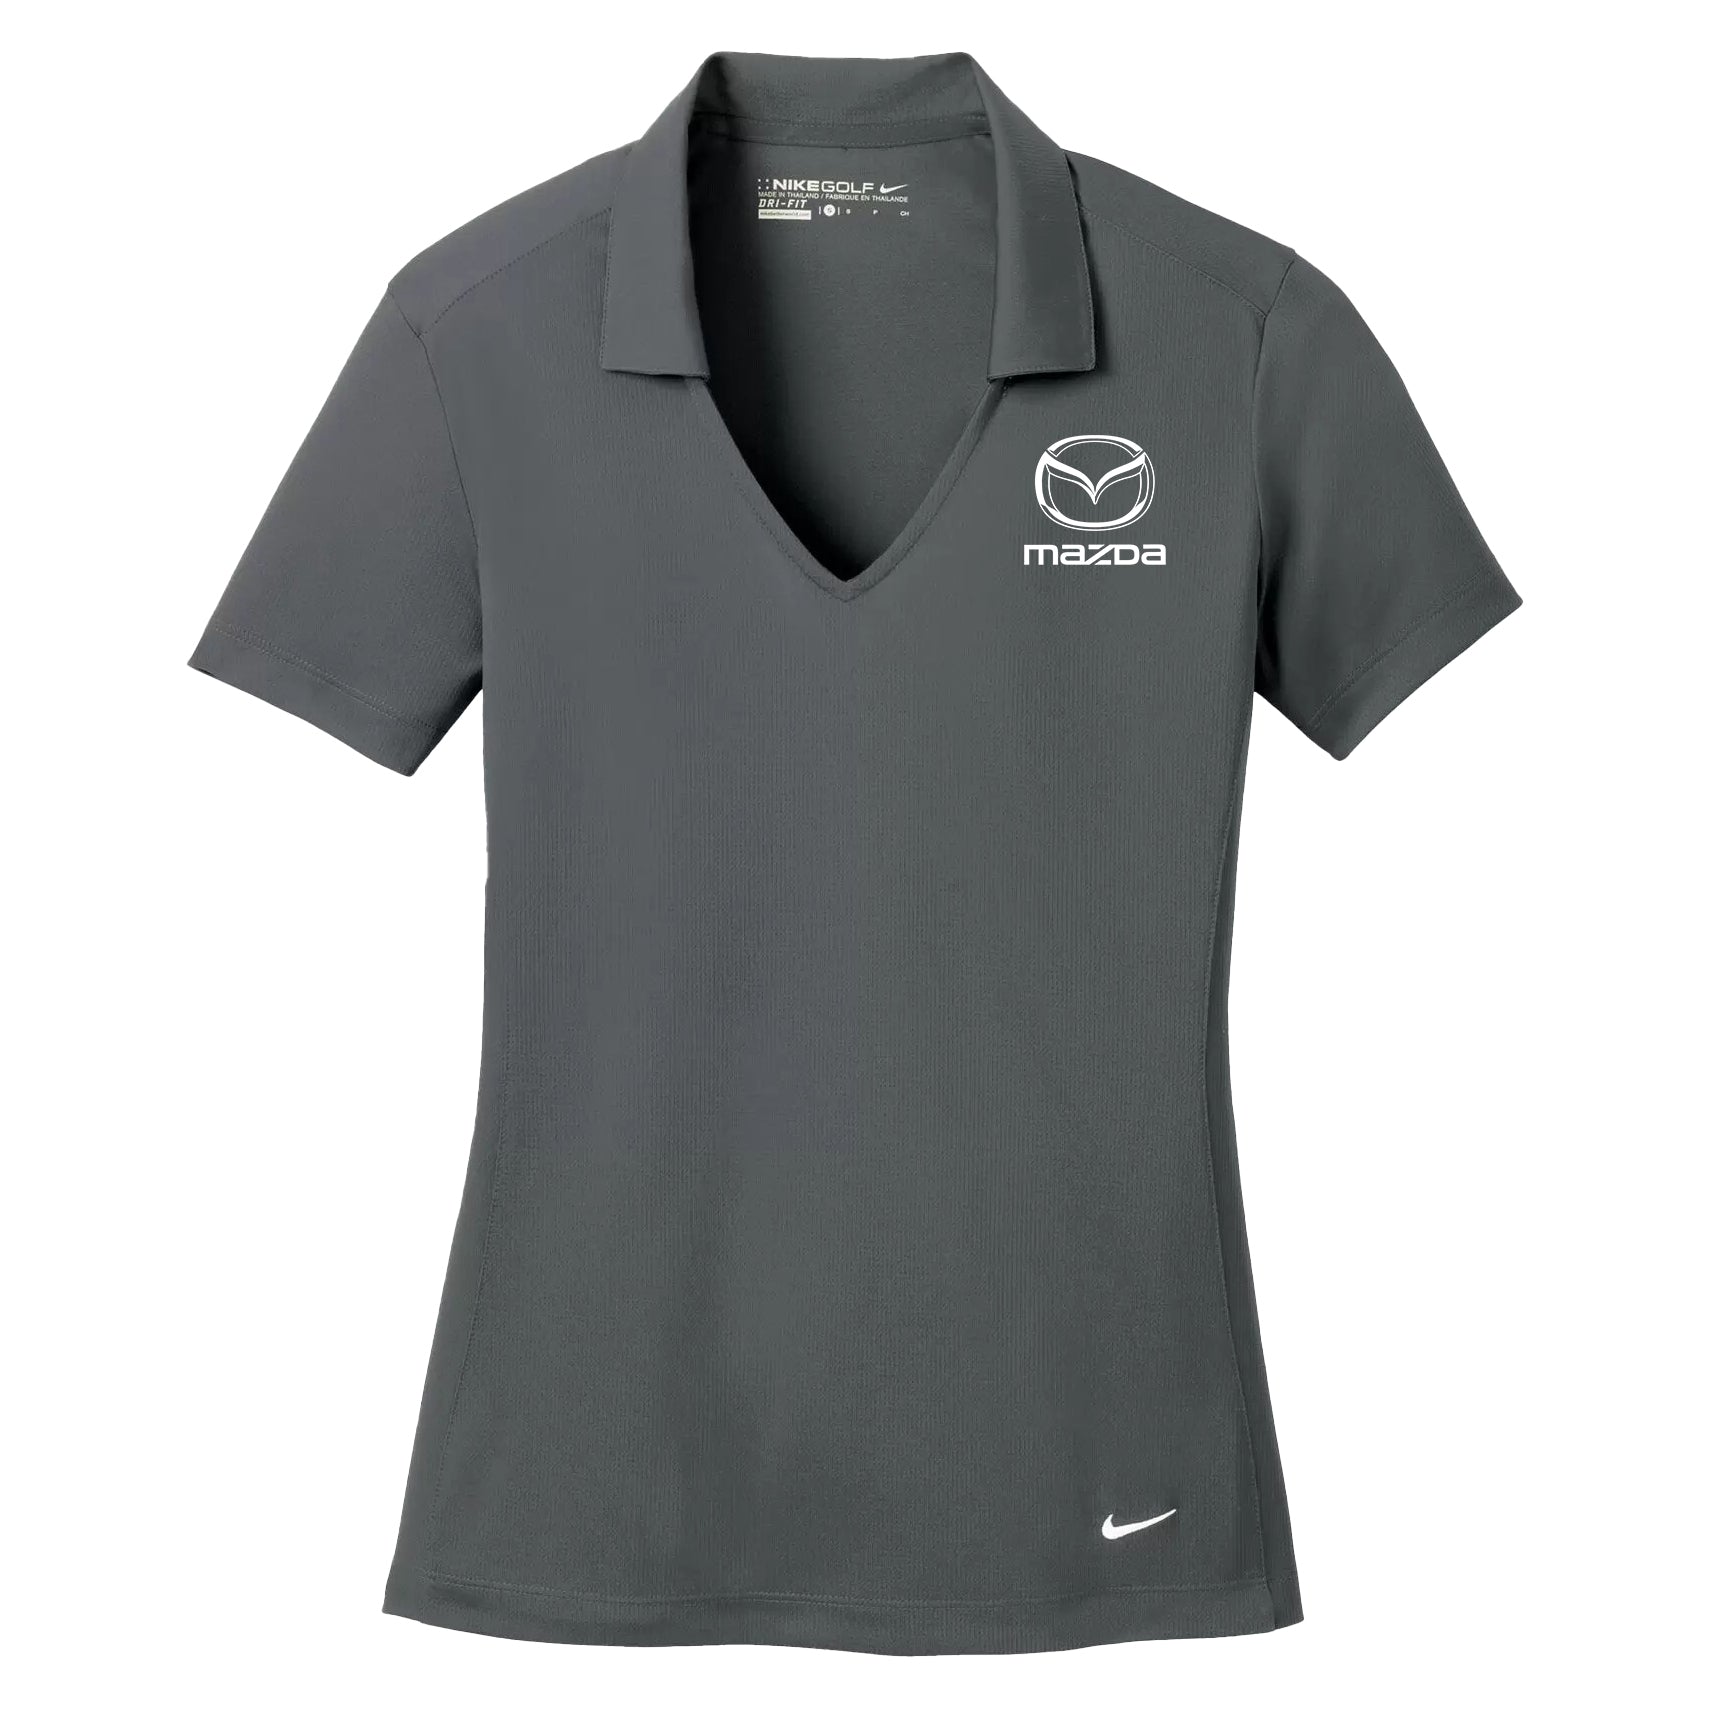 PREORDER Mazda × NIKE Dri-FIT Vertical Mesh Polo in Anthracite (Grey) | Women's